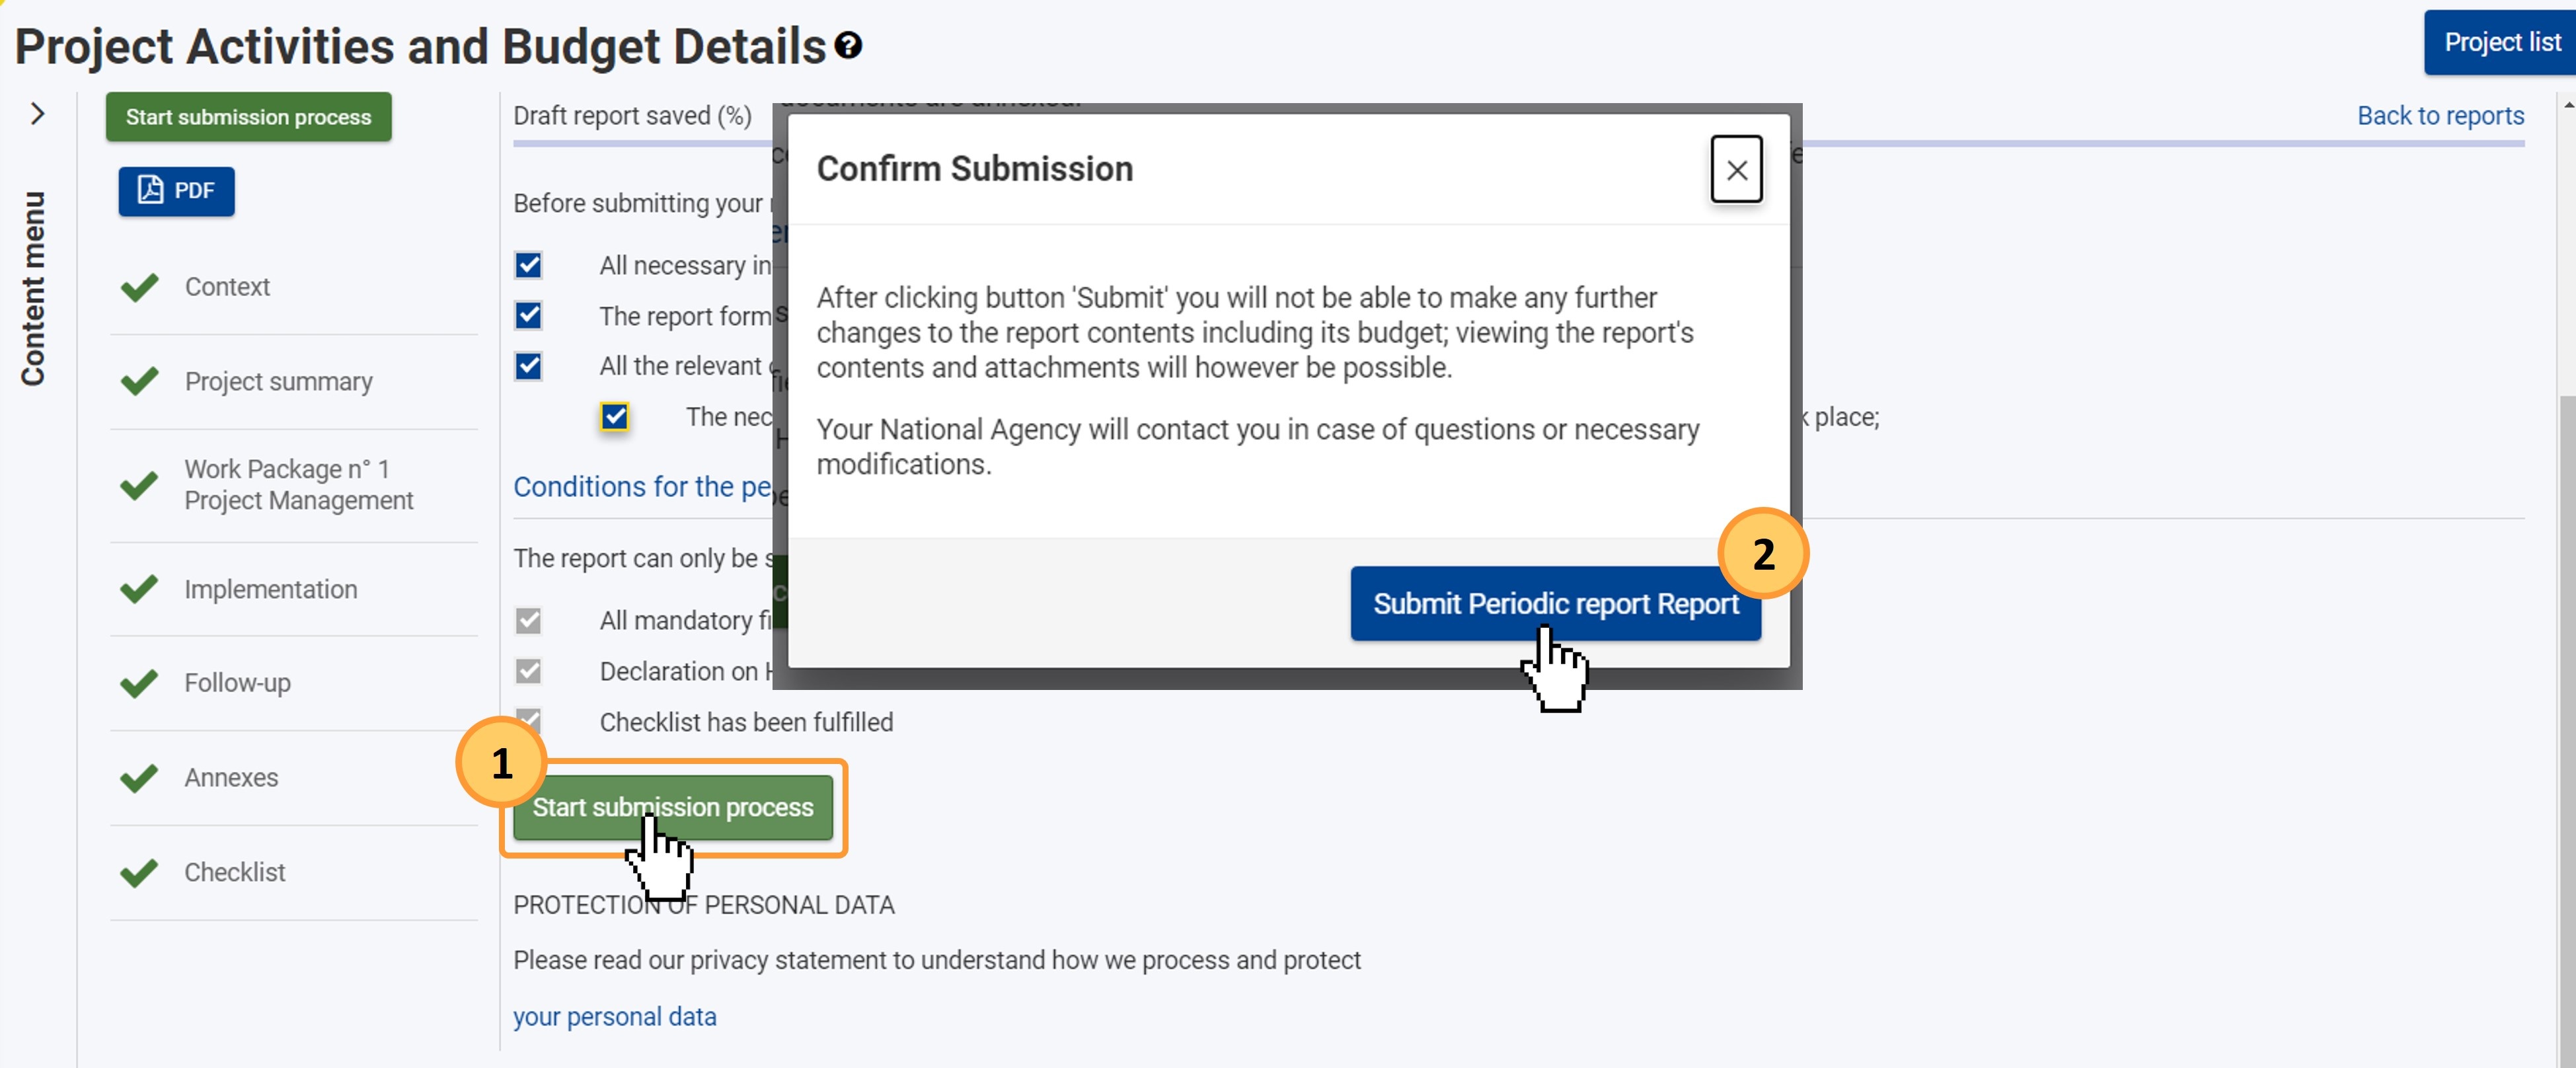 Click on the Start submission process button and confirm the report submission